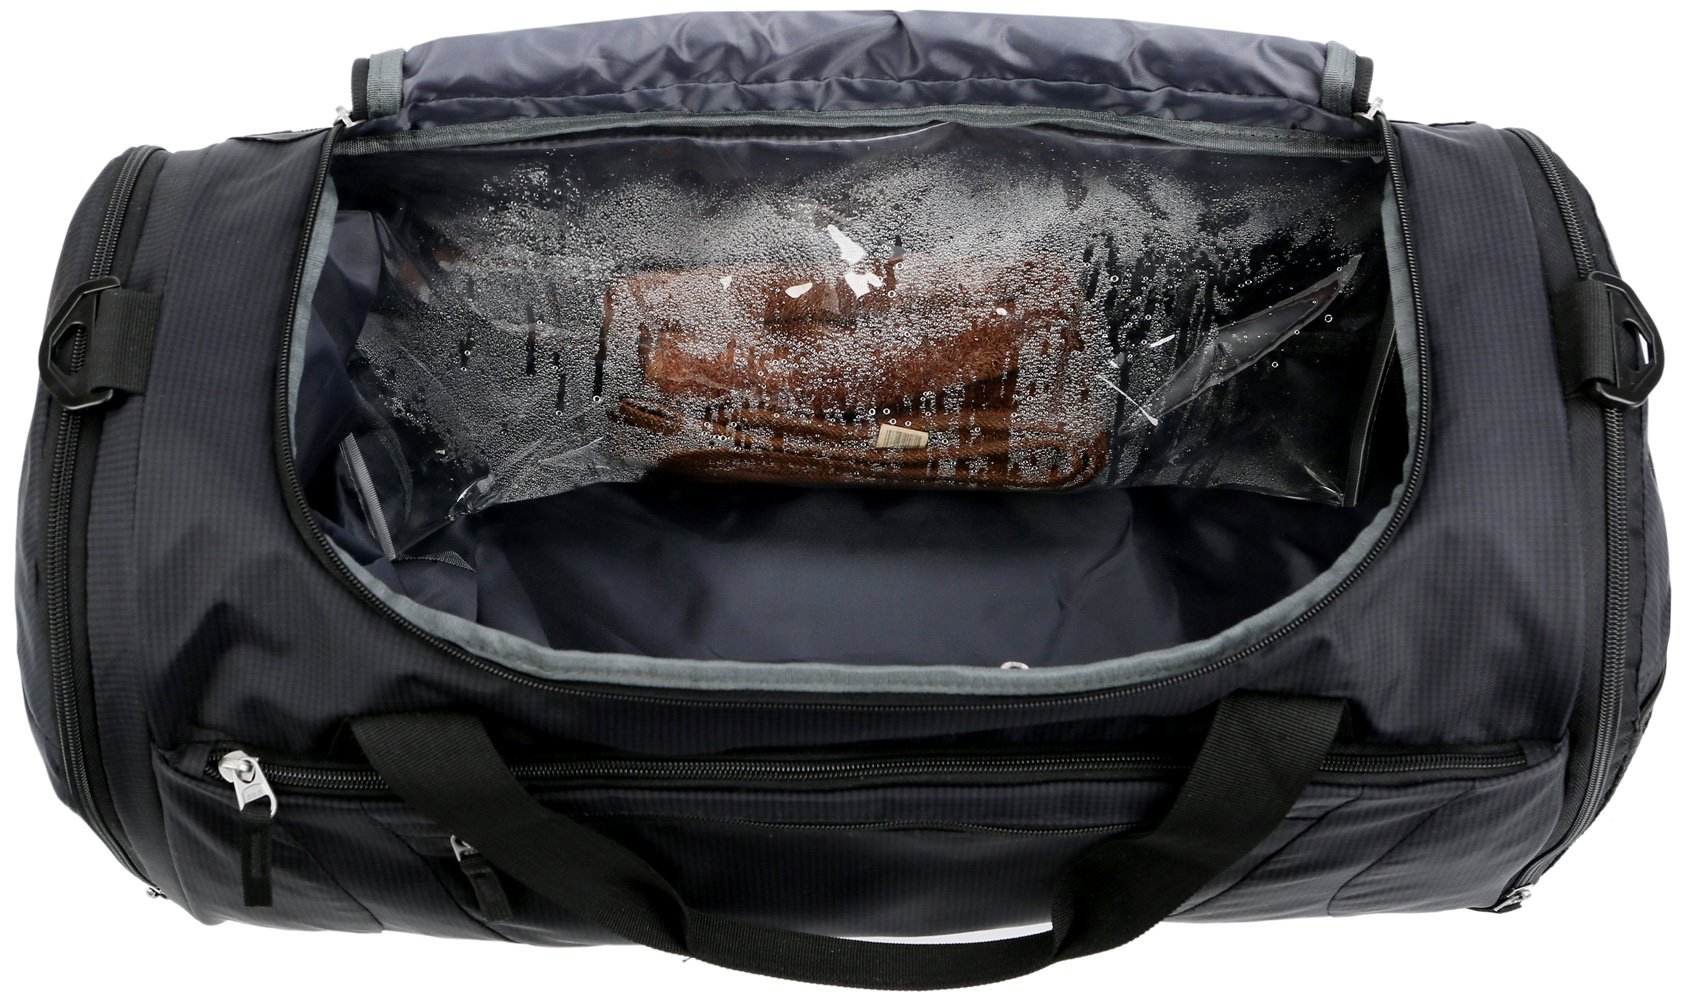 Gymbag-large-capacity-waterproof-multi-compartment-5